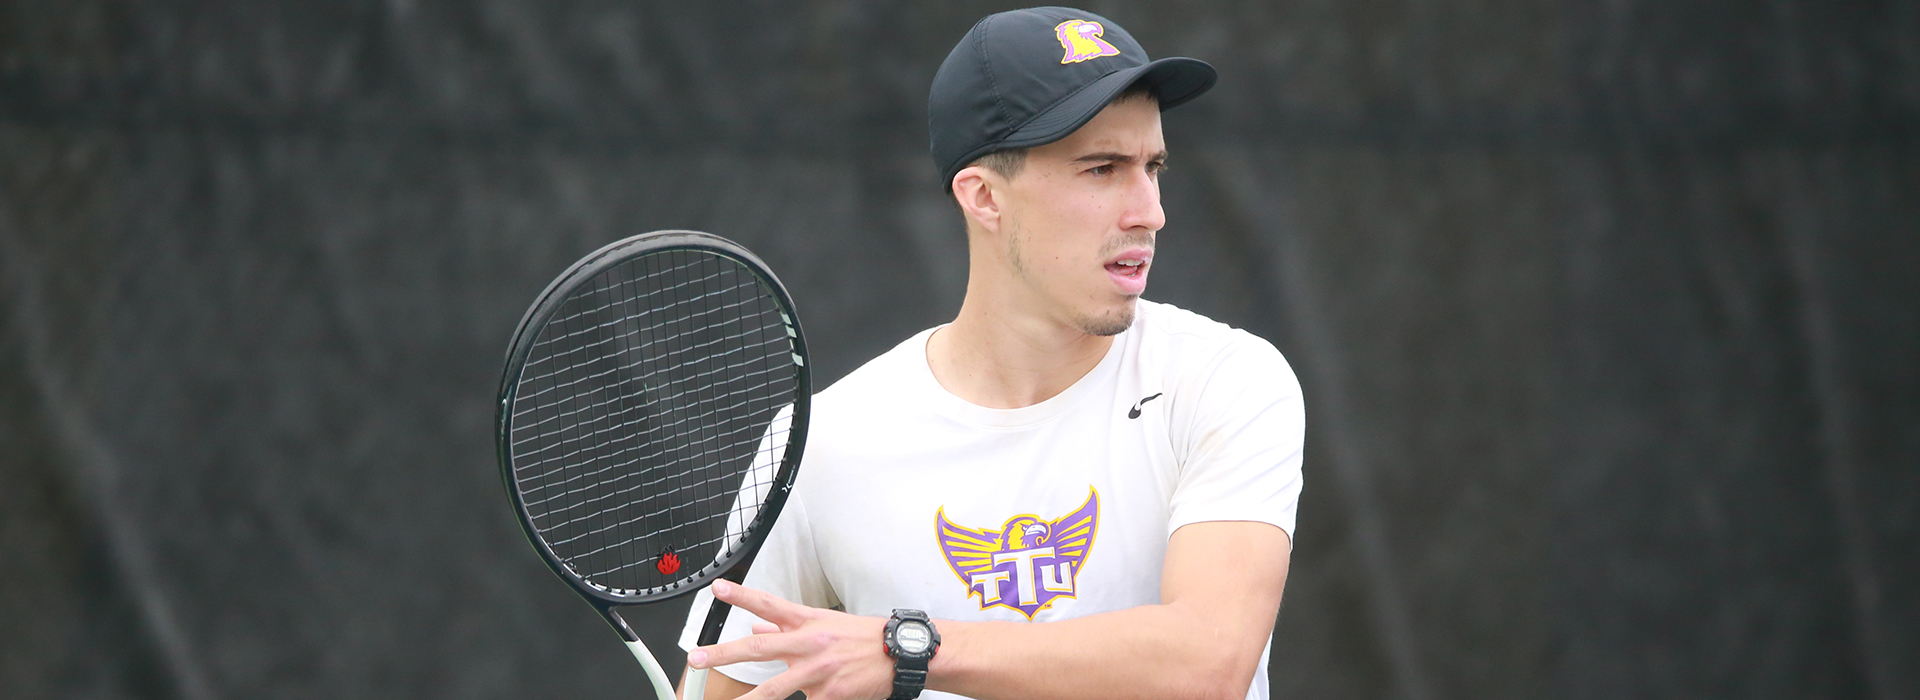 Golden Eagles keep on rolling behind 5-2 victory at Belmont